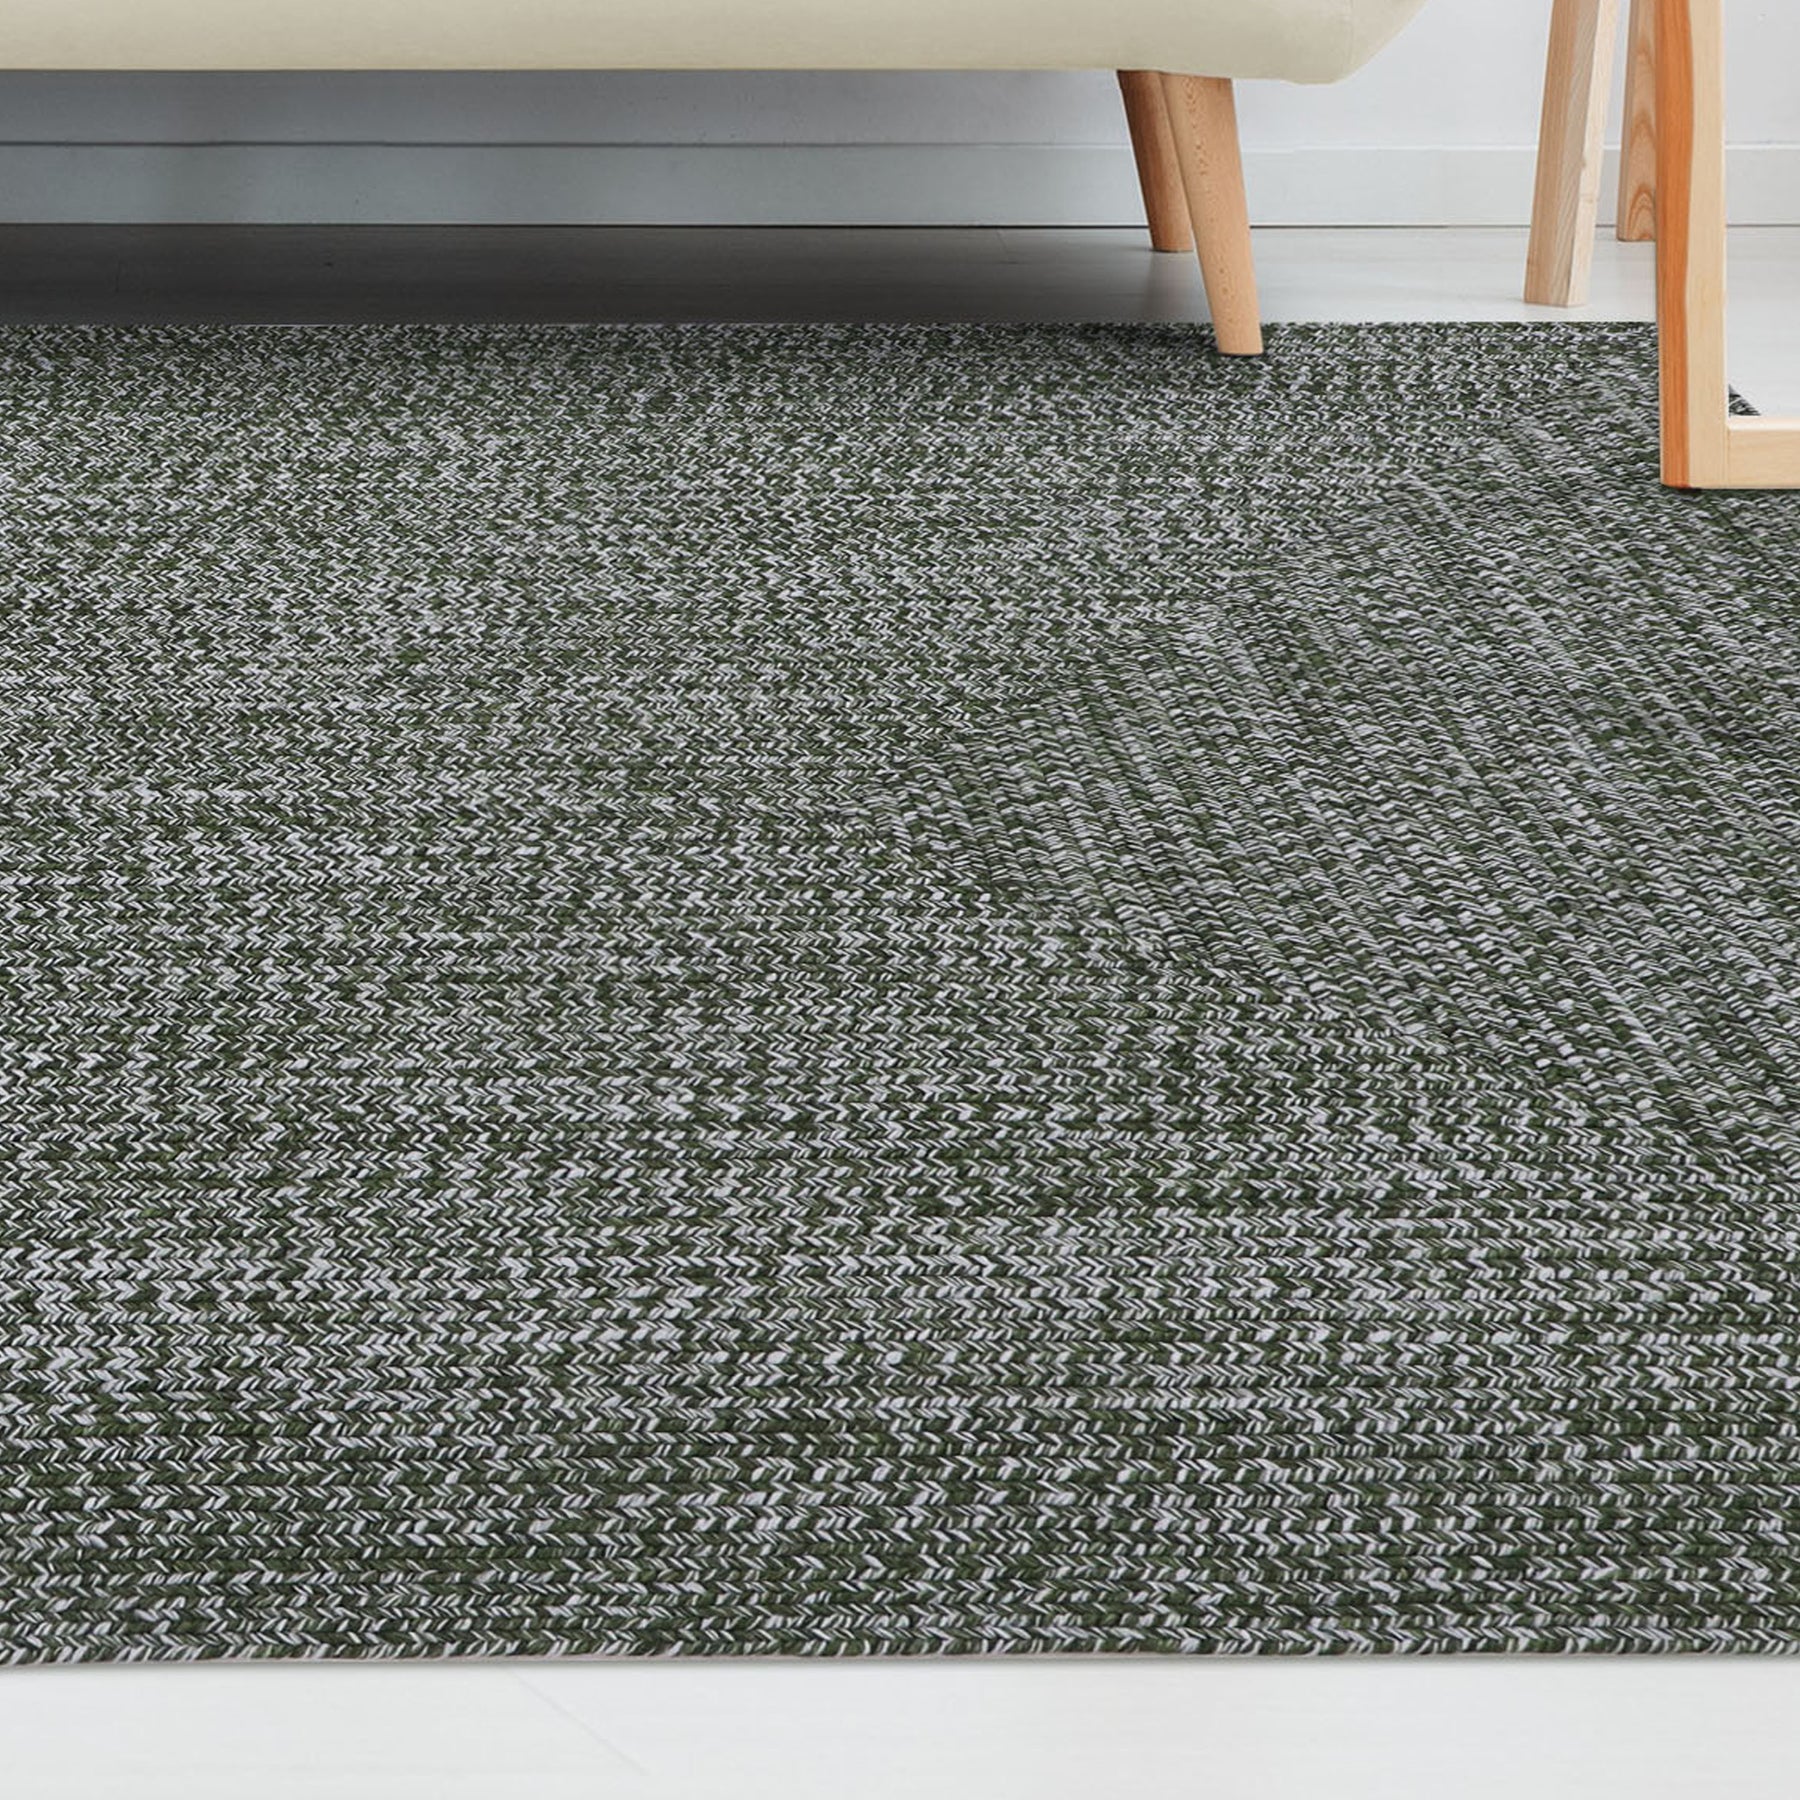 Superior Bohemian Multi-Toned Braided Patterned Indoor Outdoor Area Rug - Green-White